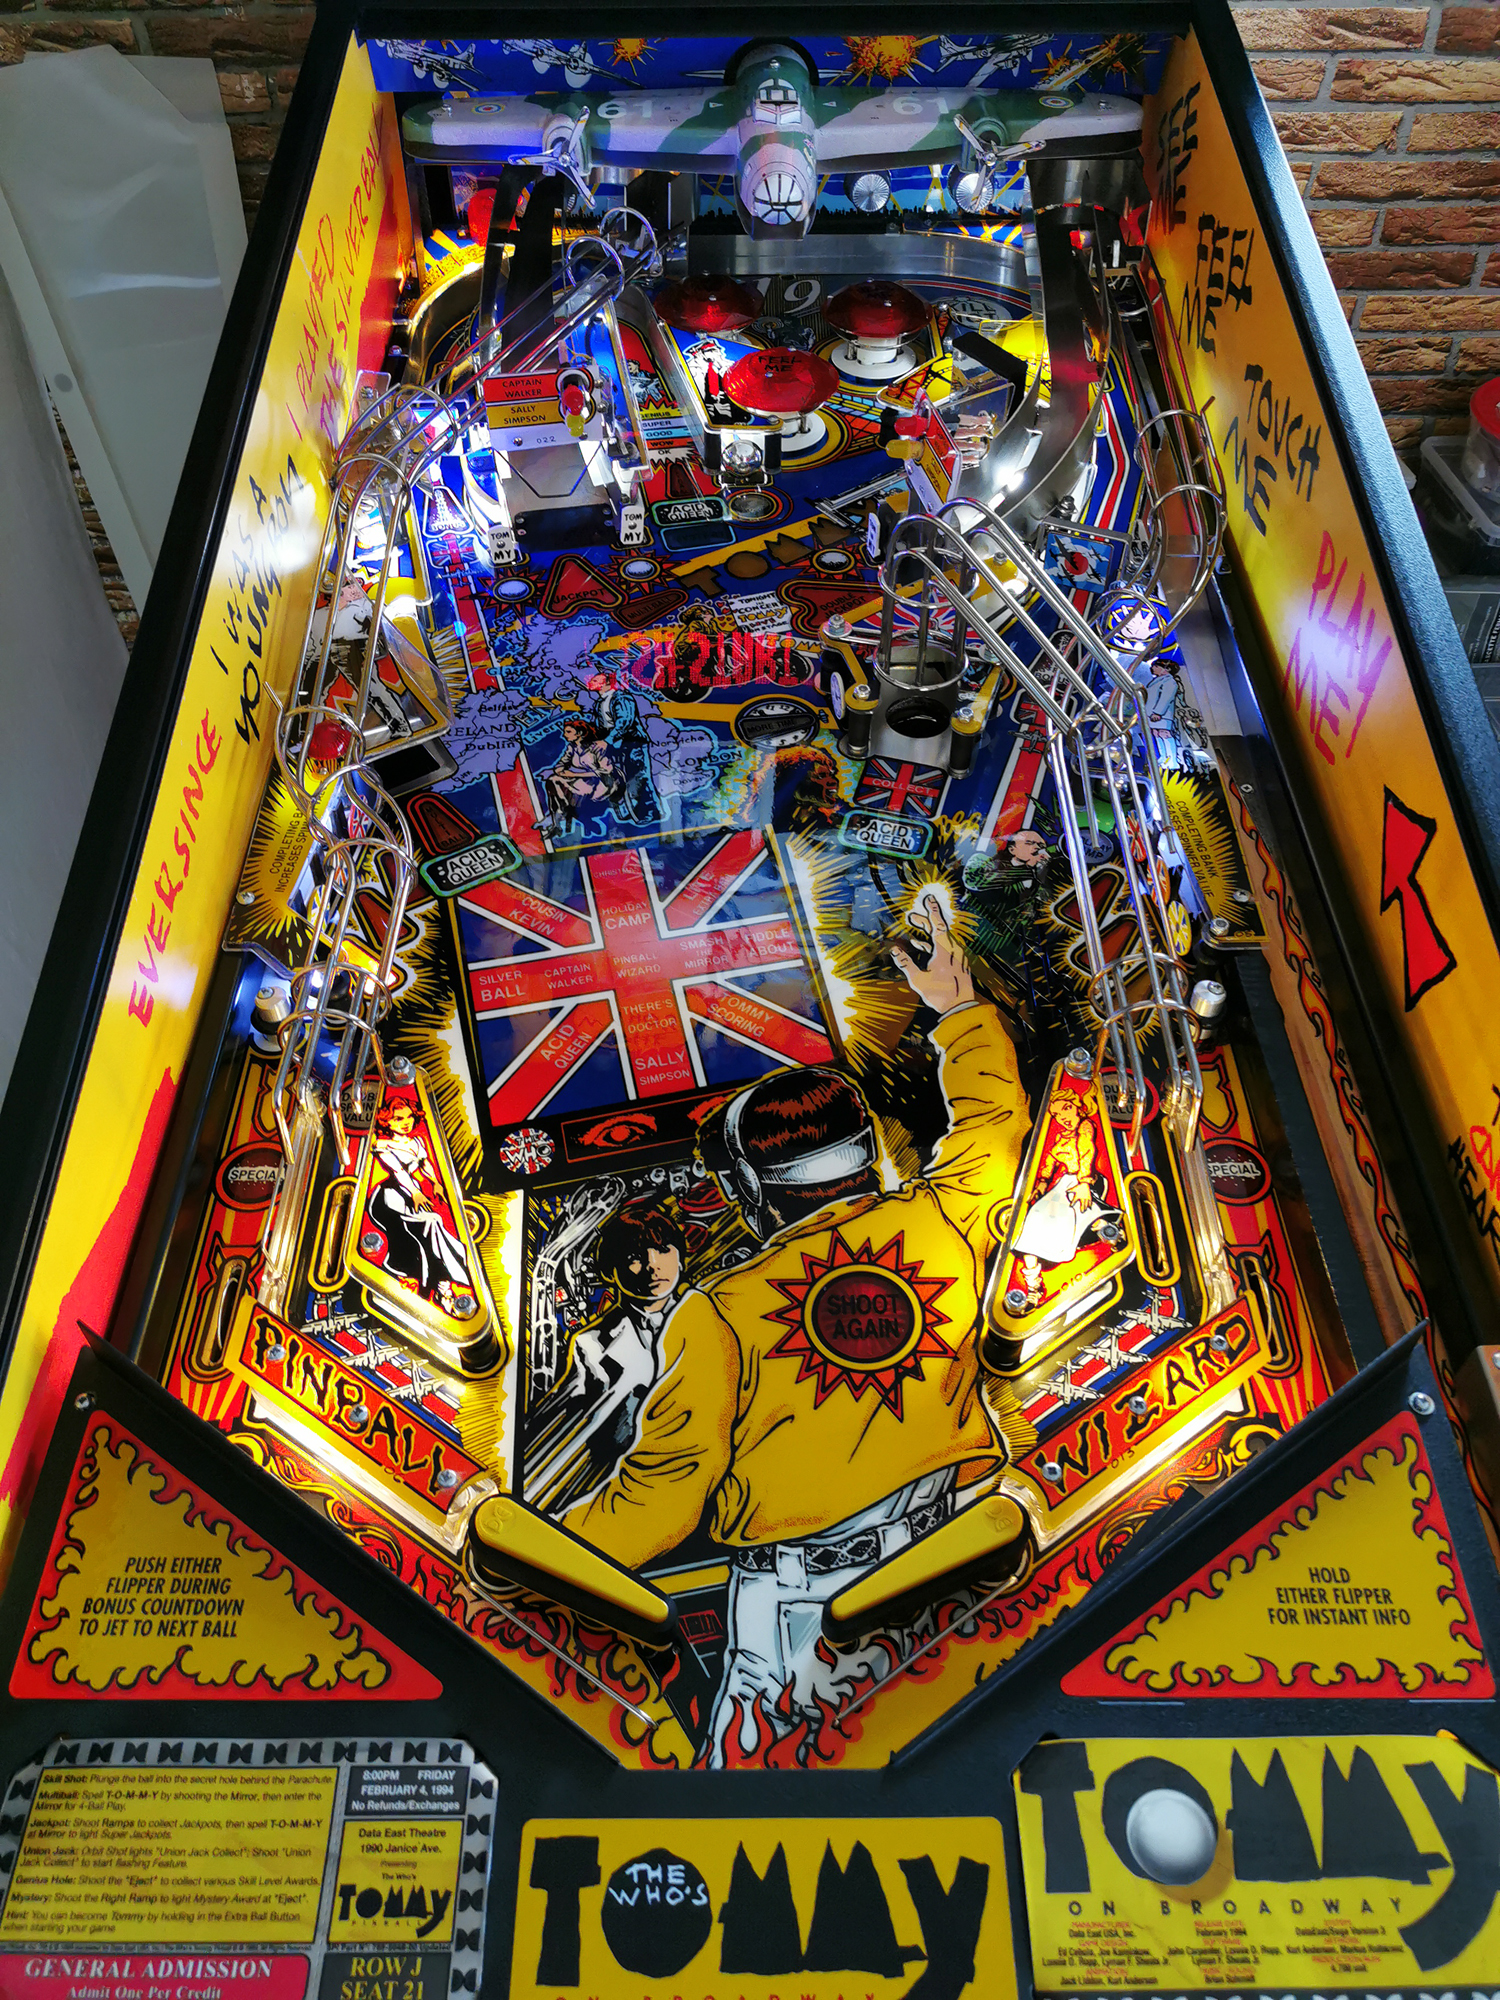 Tommy-Pinball-with-Mikonos-Curomized-Cards-photo1